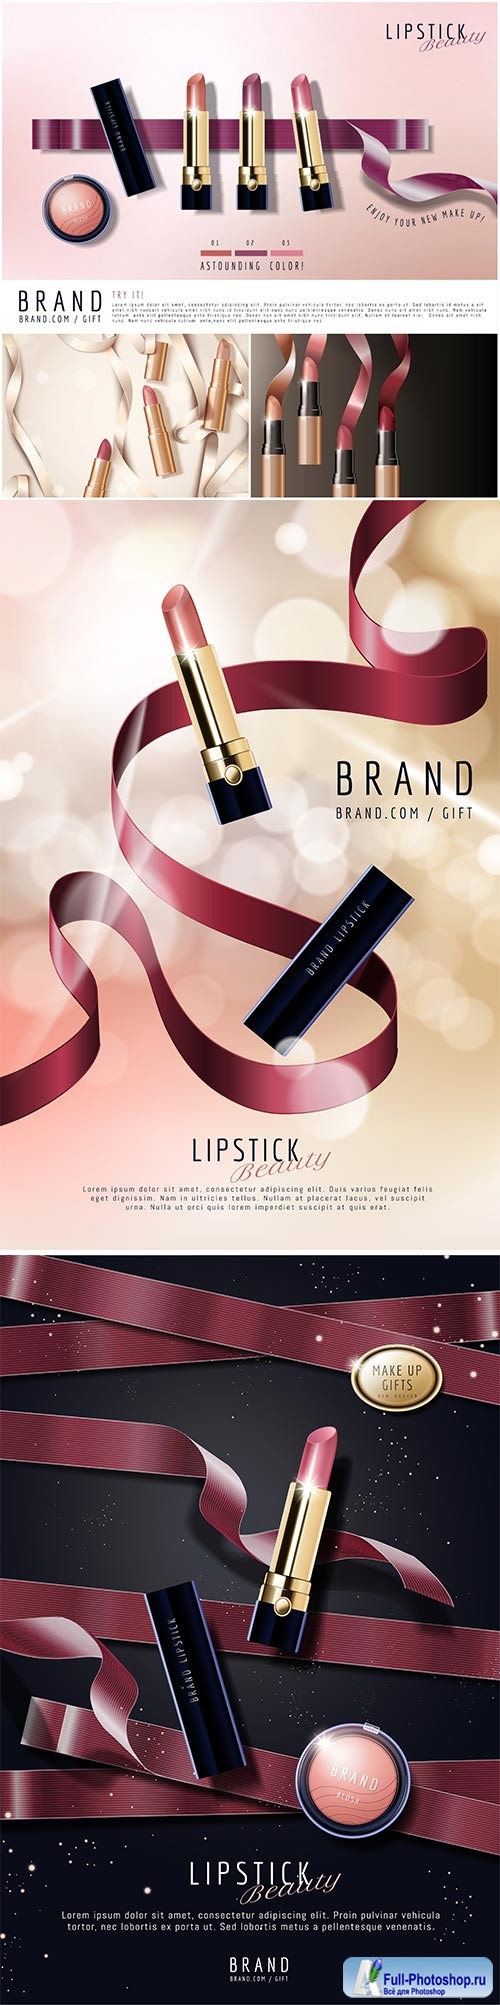 Luxury lipstick ads with ribbons in 3d vector illustration